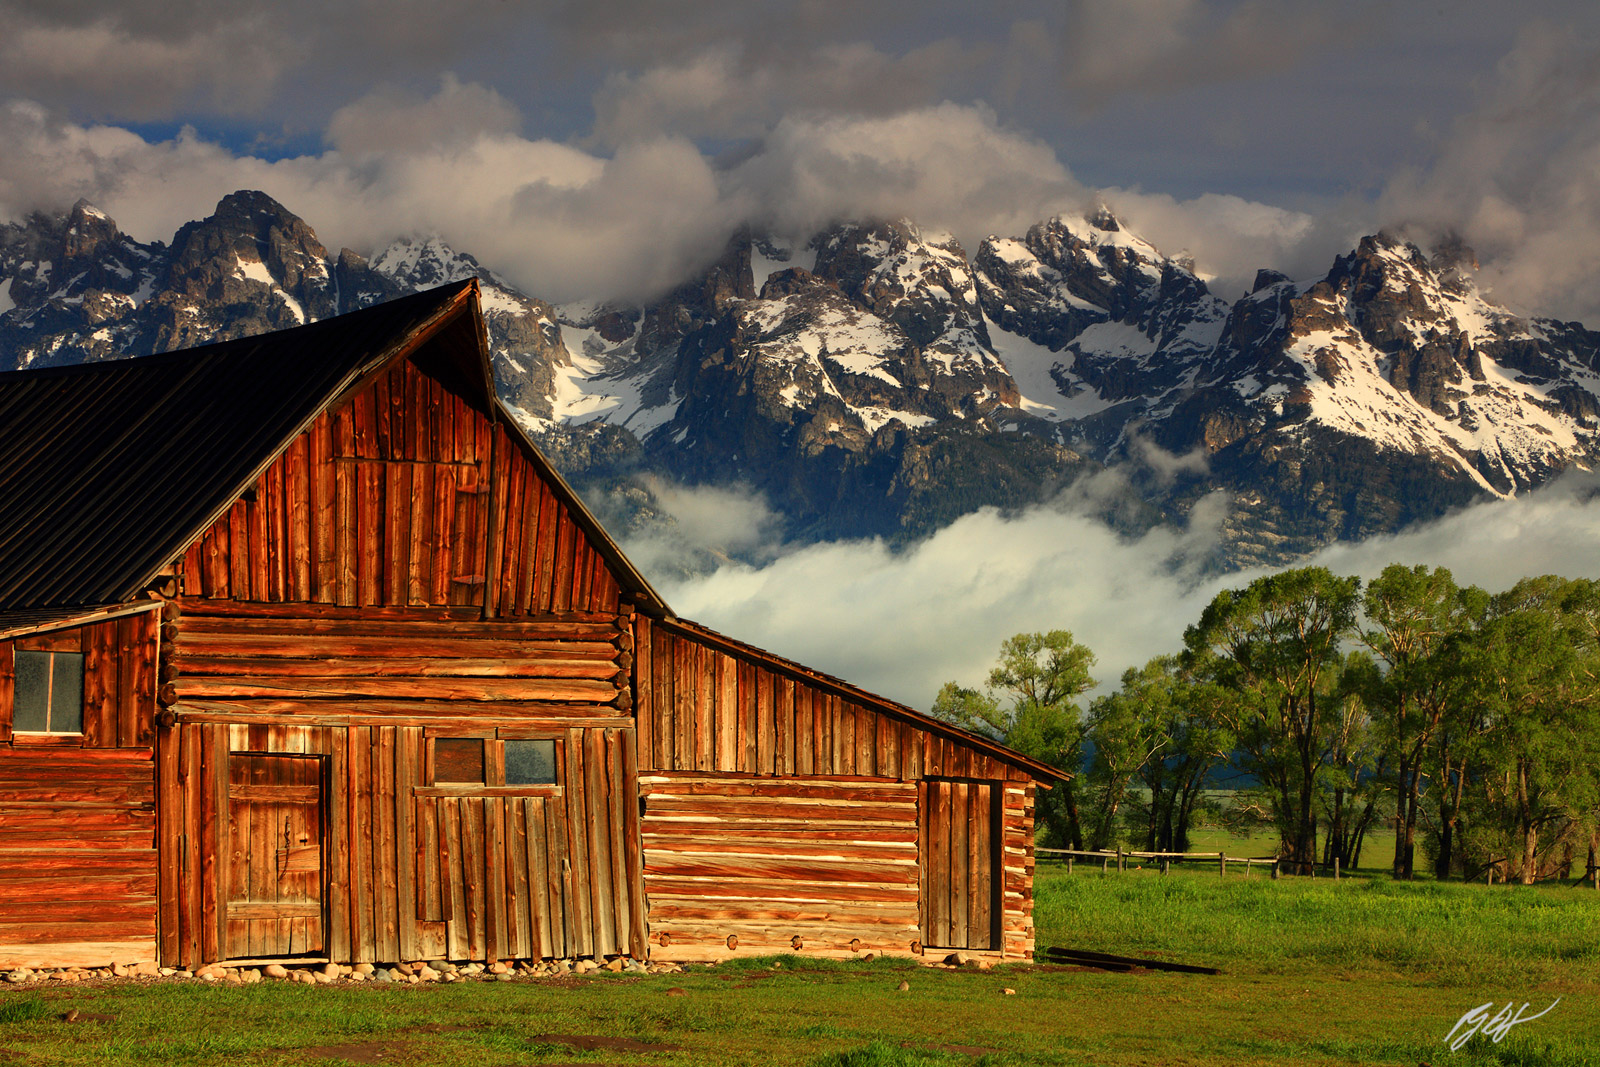 Morning Light on the T. A. Moulton Barn along Mormon Row in Grand Teton National Park in Wyoming